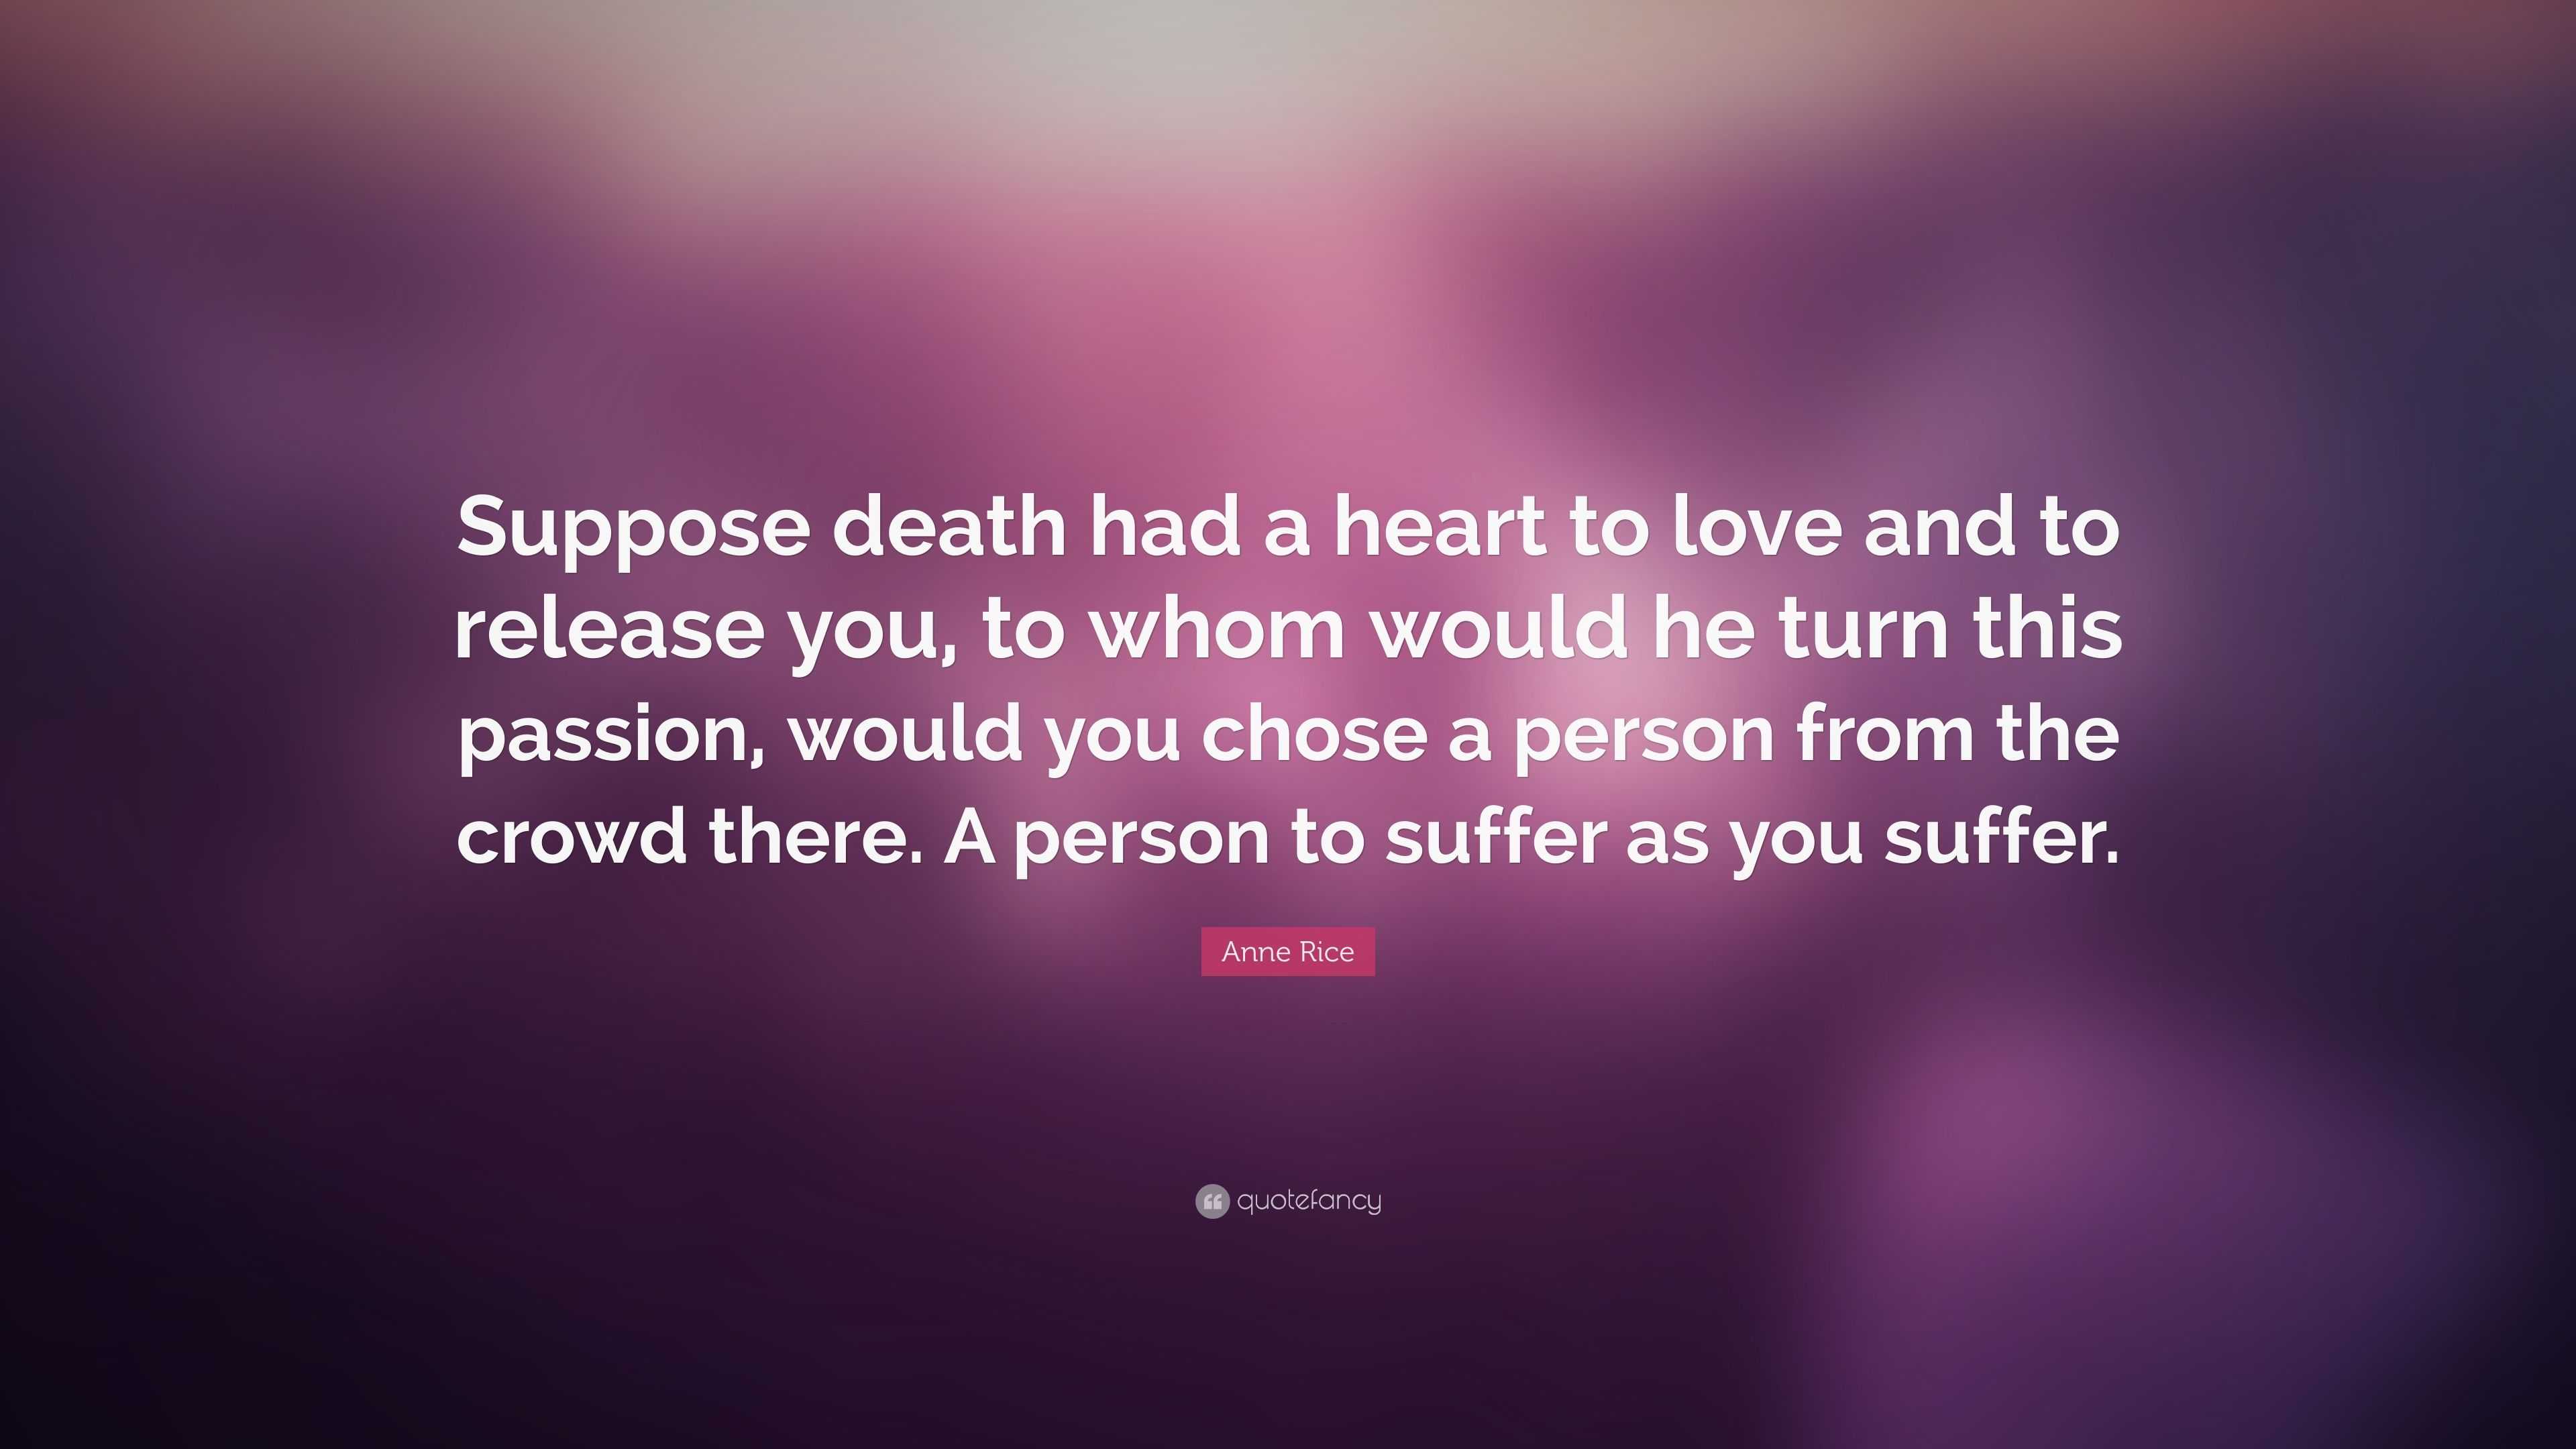 Anne Rice Quote: “Suppose death had a heart to love and to release you ...